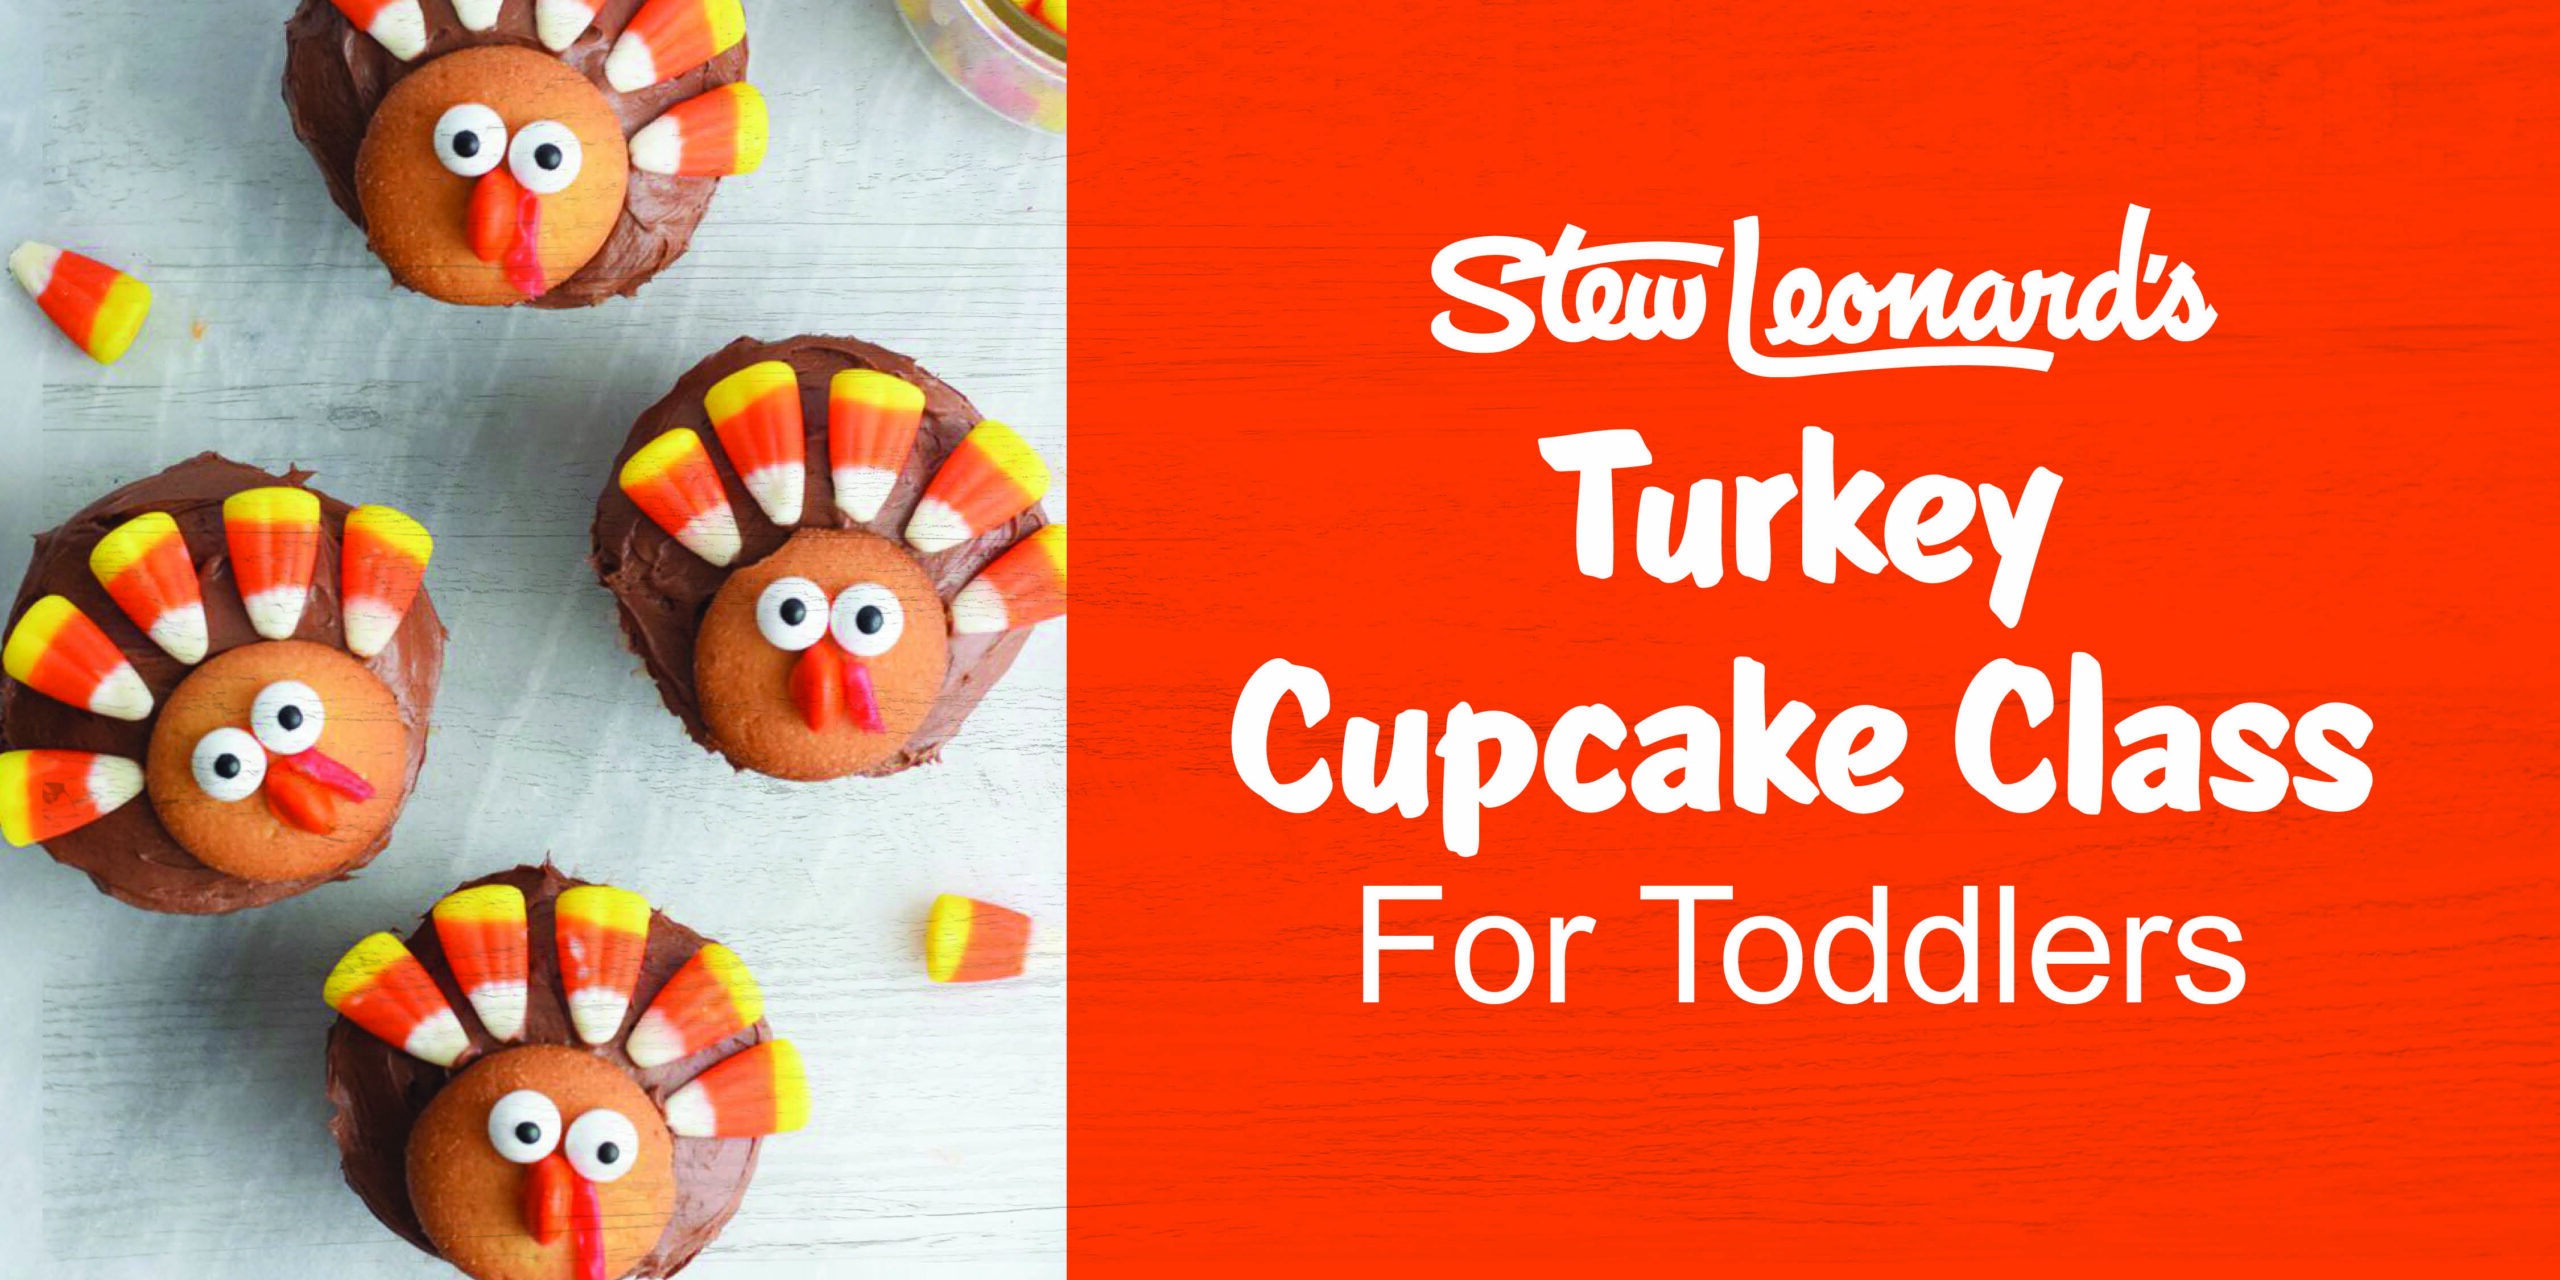 Turkey-Themed Cupcakes Class for Toddlers